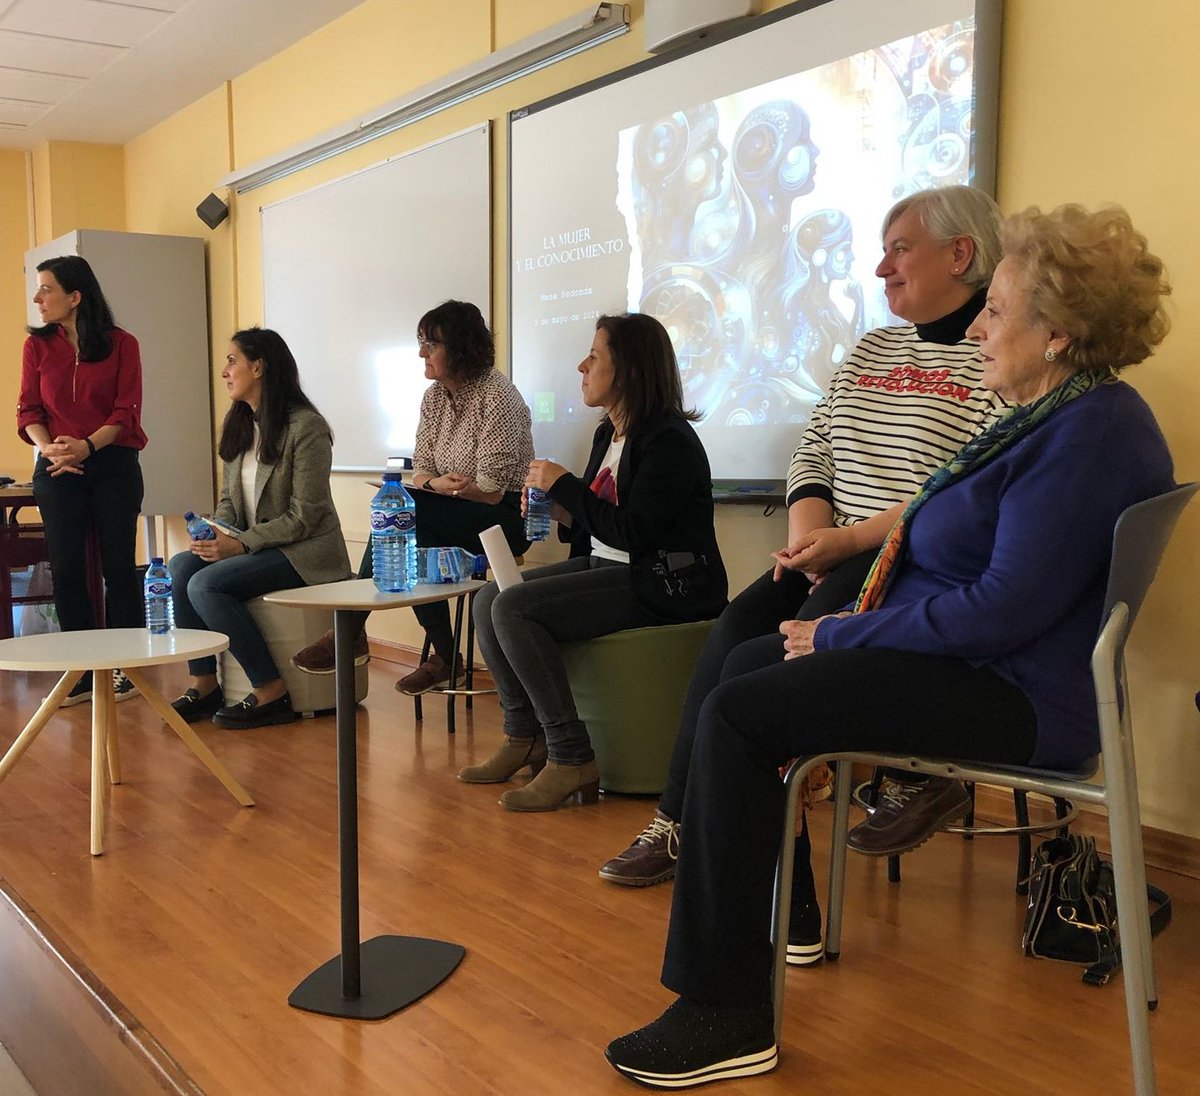 It has been a pleasure to listen to our colleague @bagueda at the round table 'Mujer y conocimiento' ♀️, organized in the Soria campus. She has made valuable contributions at this event, advocating for women's occupation of positions of power within the university and society.